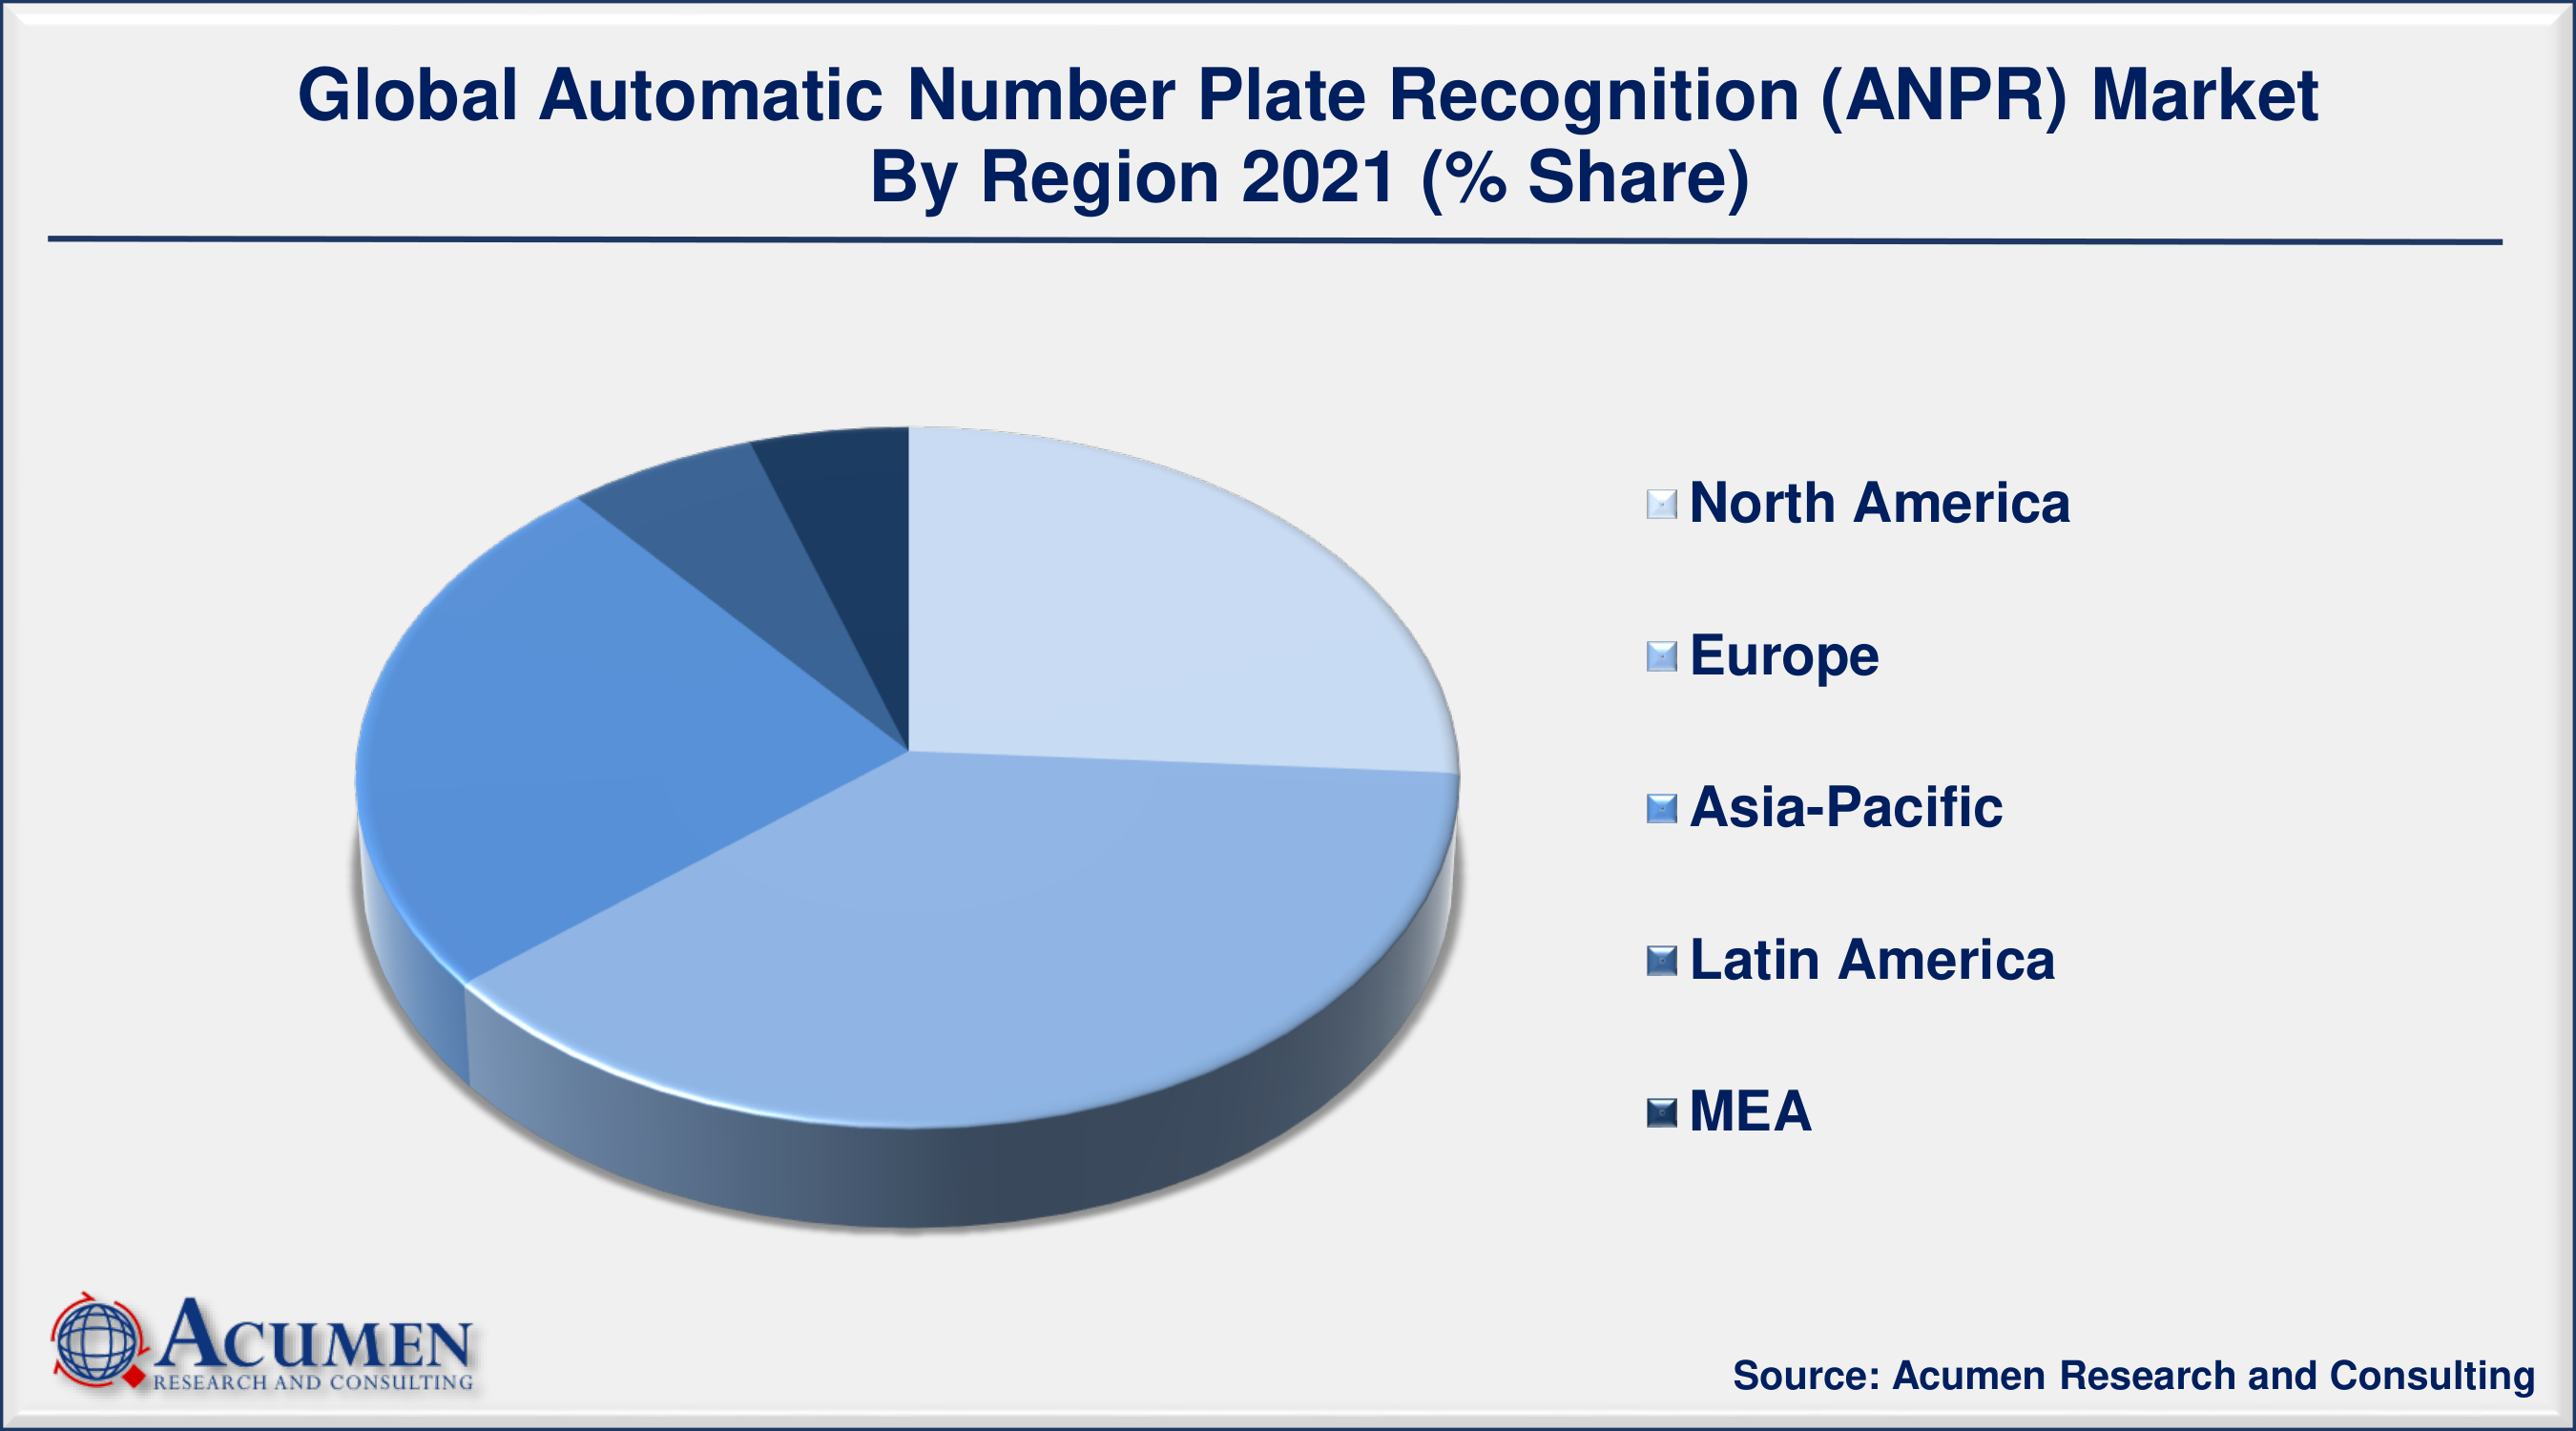  Automatic Number Plate Recognition (ANPR) Market Size is predicted to be worth USD 5,825 Million by 2030, with a CAGR of 9.6% from 2022 to 2030.